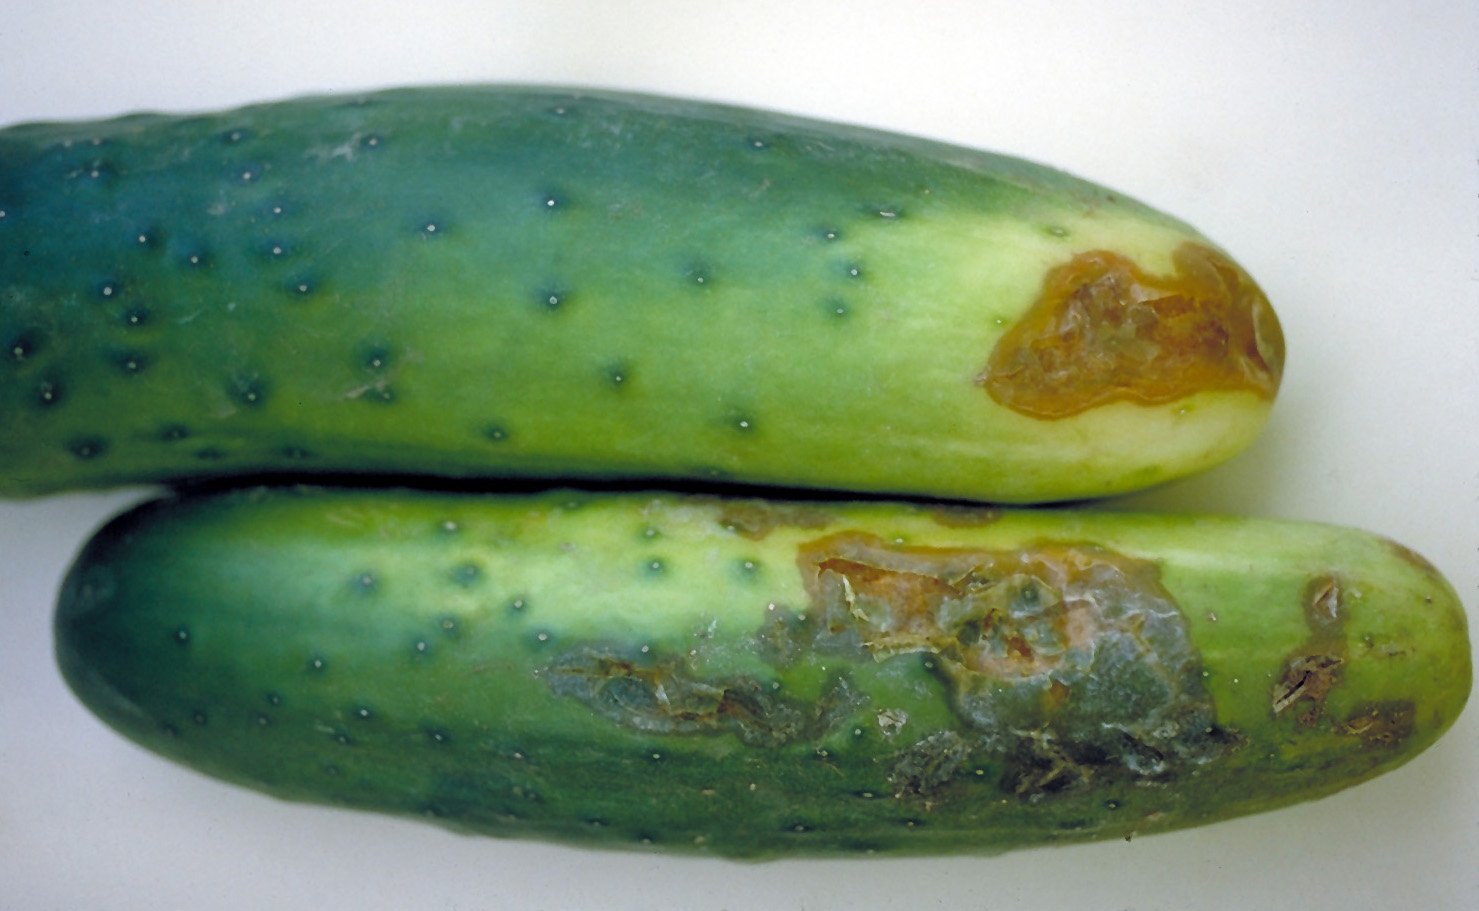 Belly rot on cucumber.